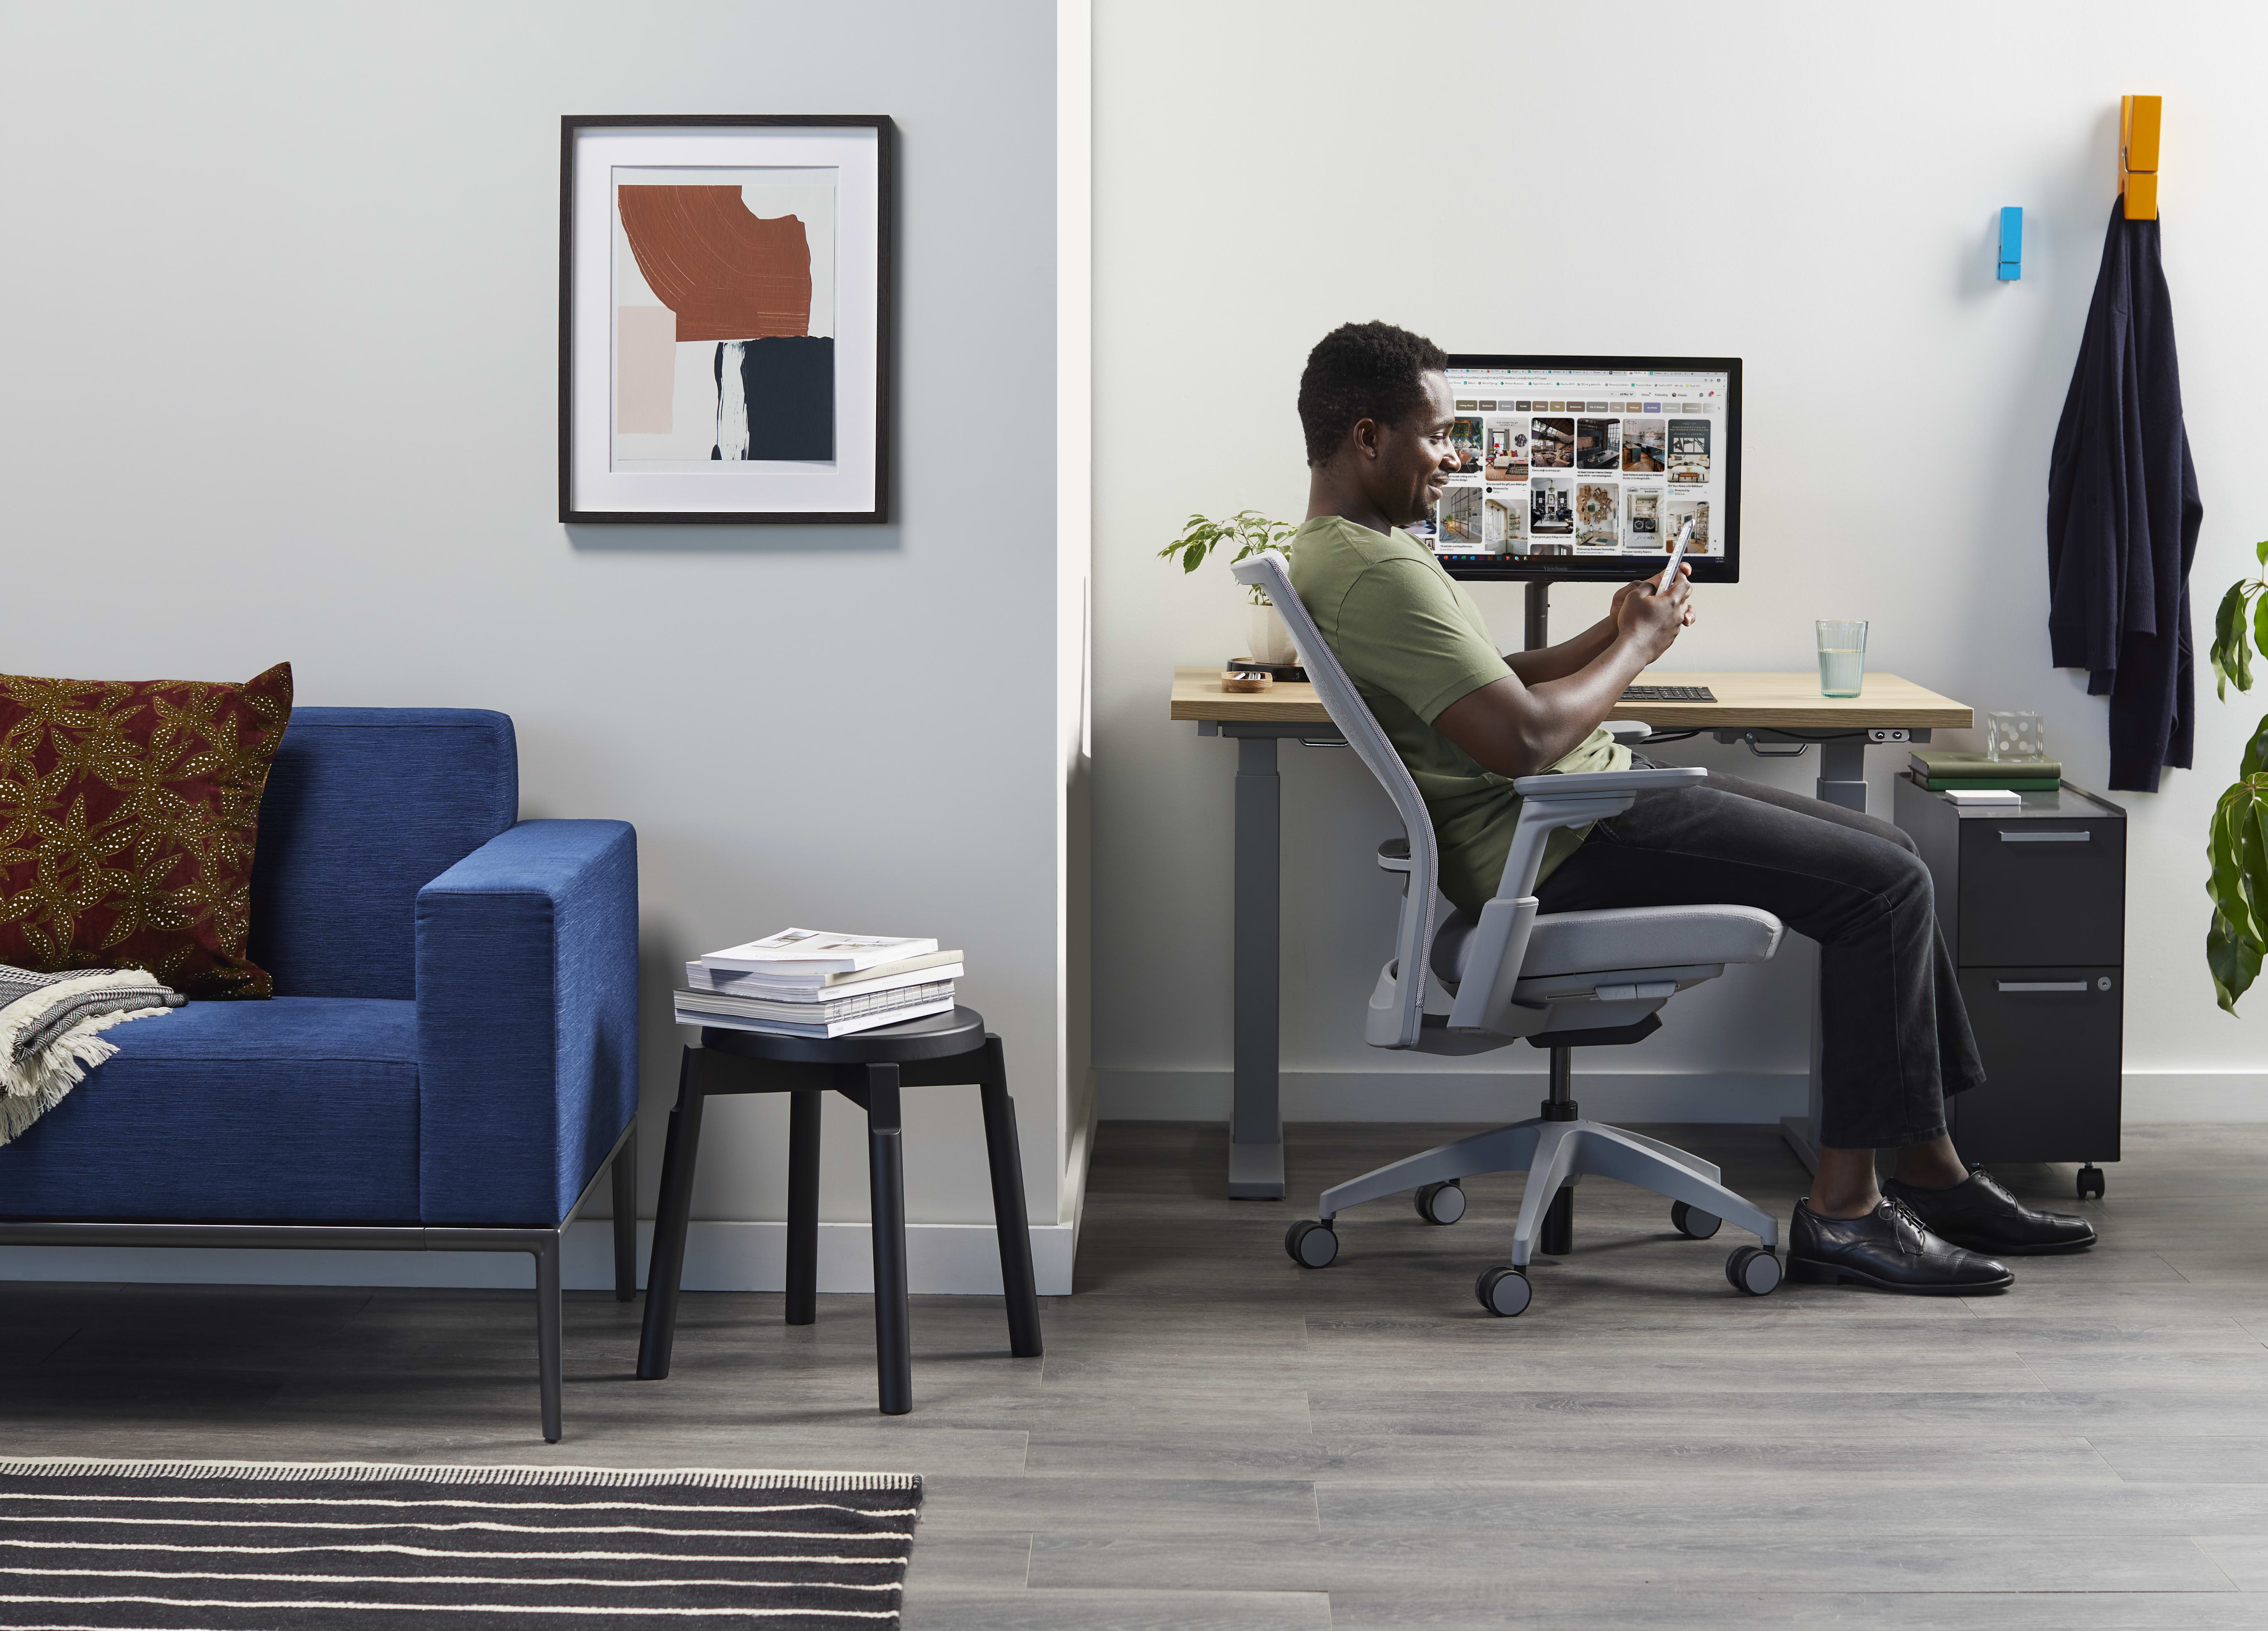 Work from home setting featuring a blue sofa, grey task chair, height-adjustable desk, and small storage.